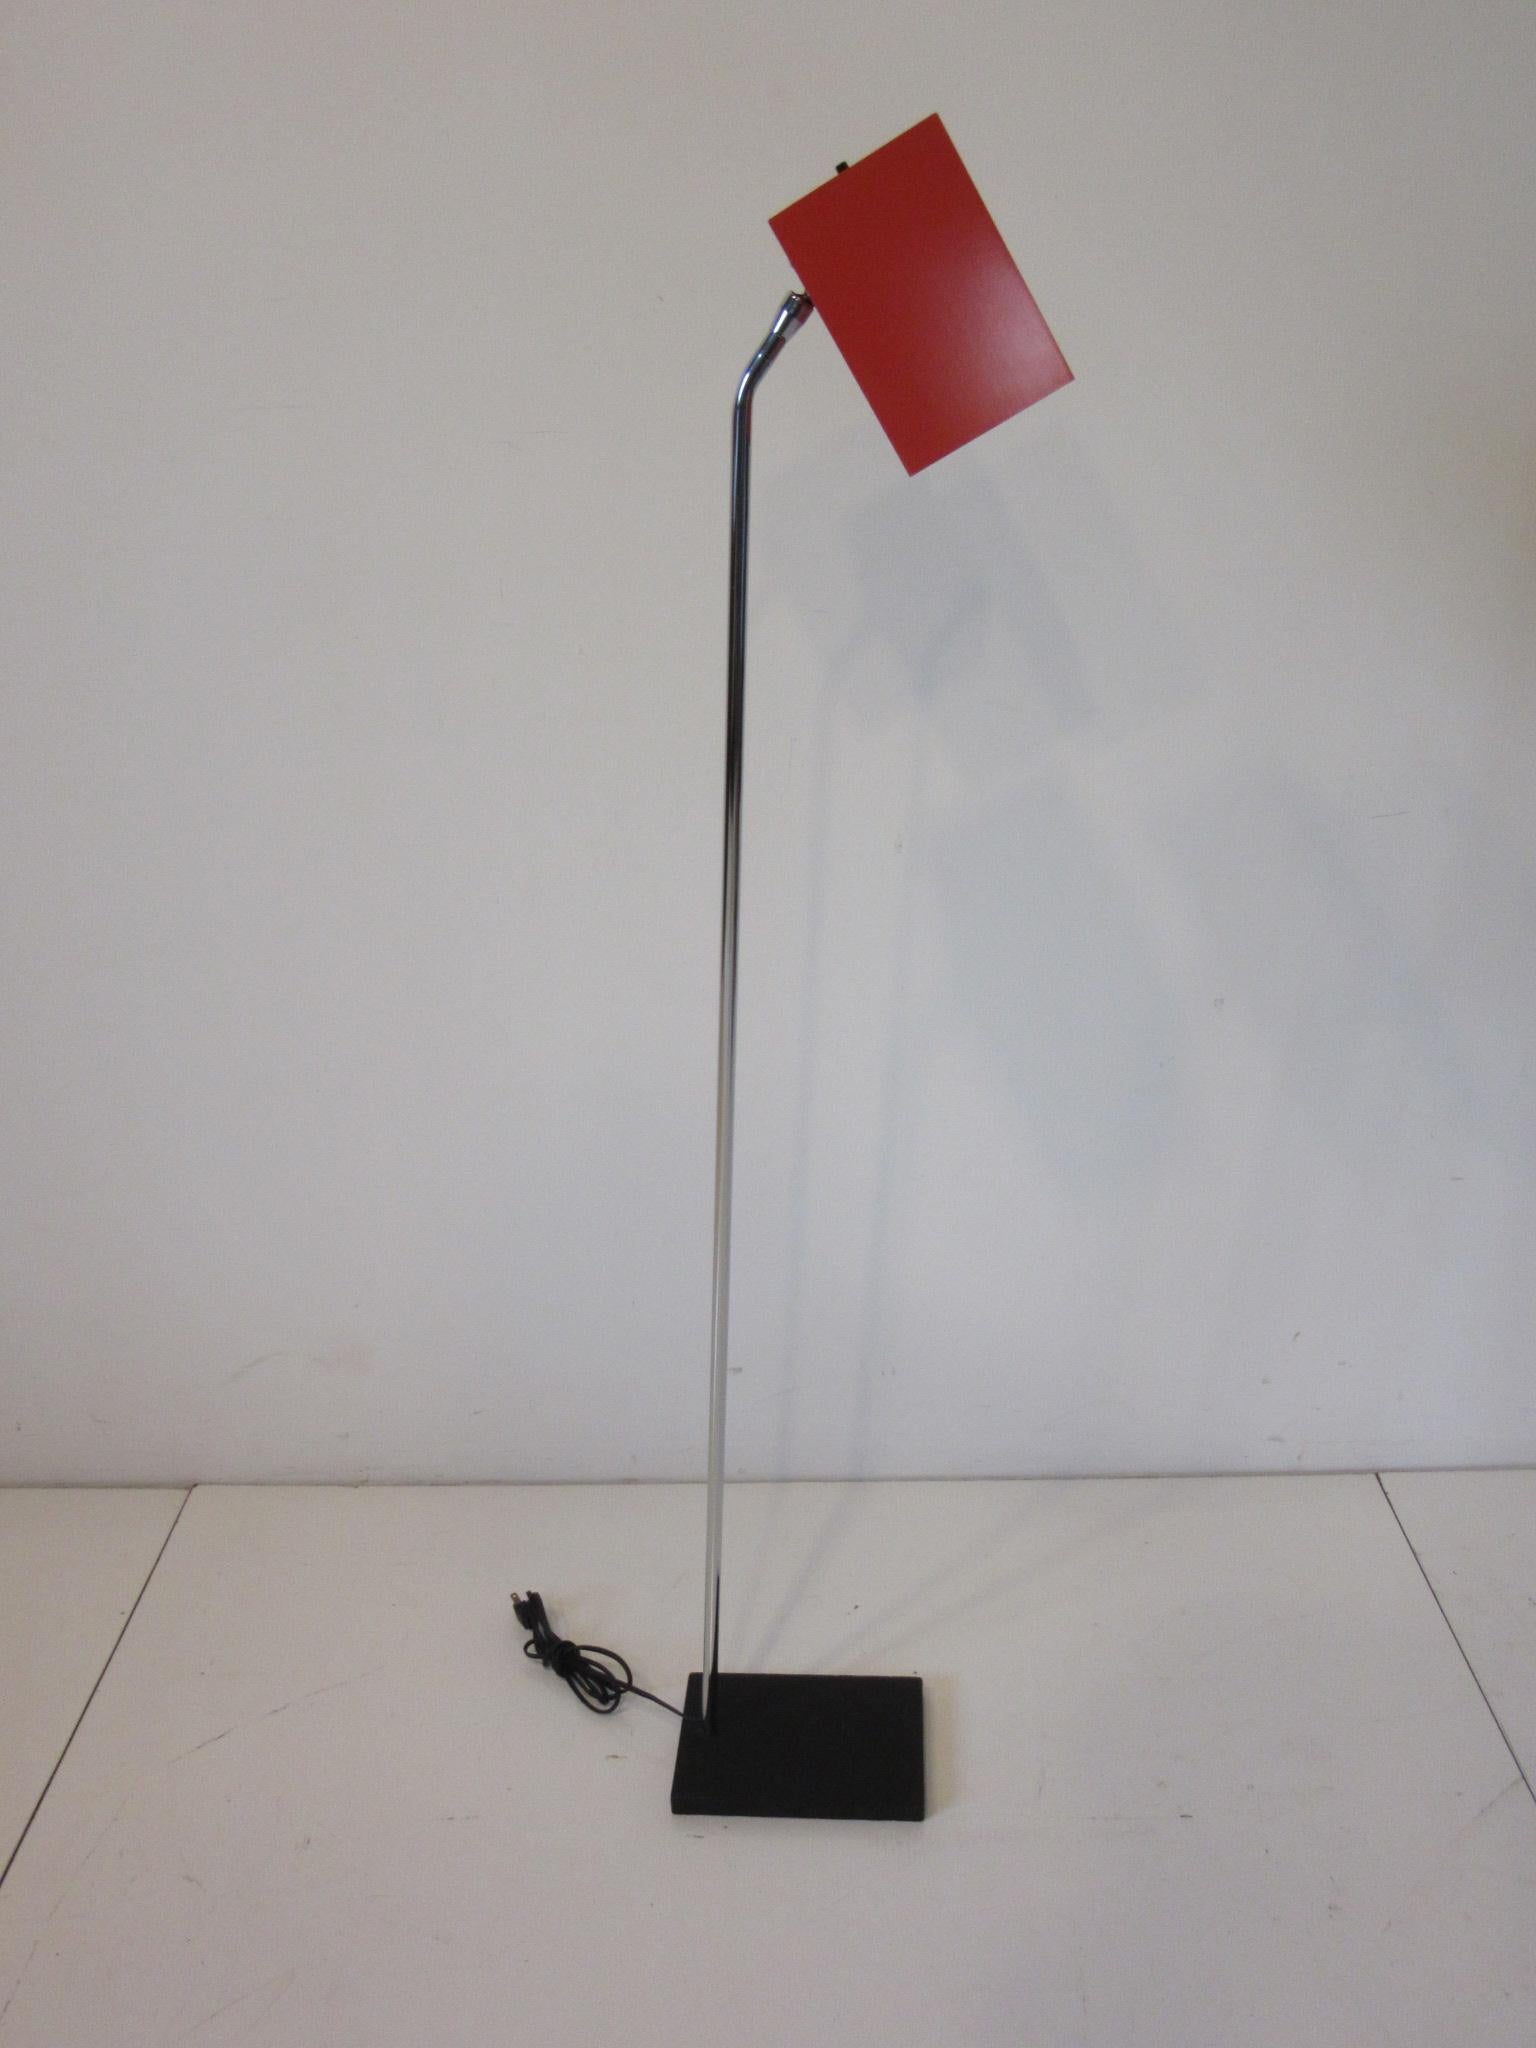 A well crafted floor lamp with heavy satin black steel base and chrome shaft having a medium orange adjustable metal box shade designed by Robert Sonneman for the George Kovacs Lighting Company.